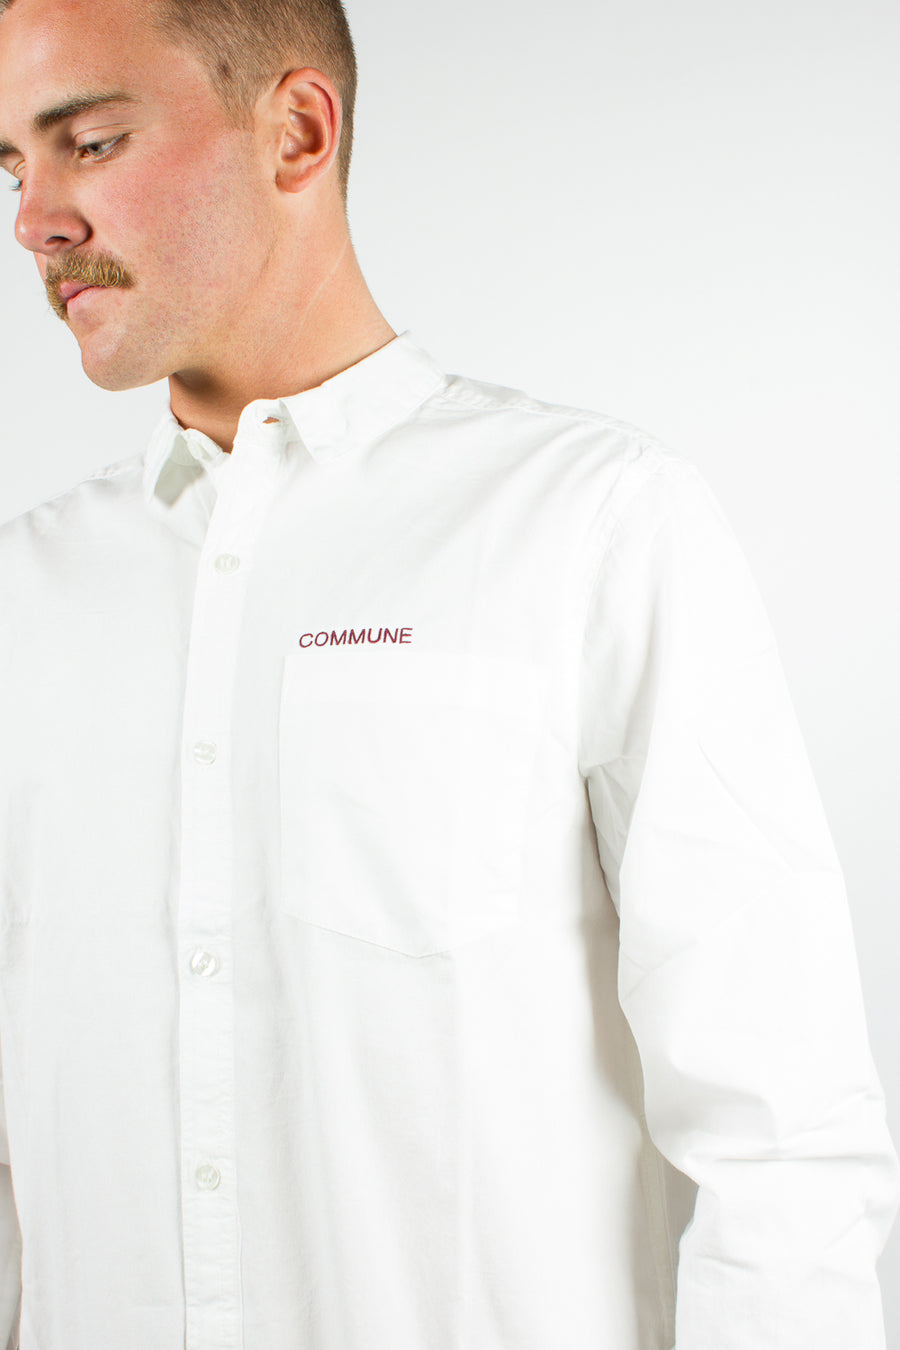 Polymer X Commune Capital Essential L/S White